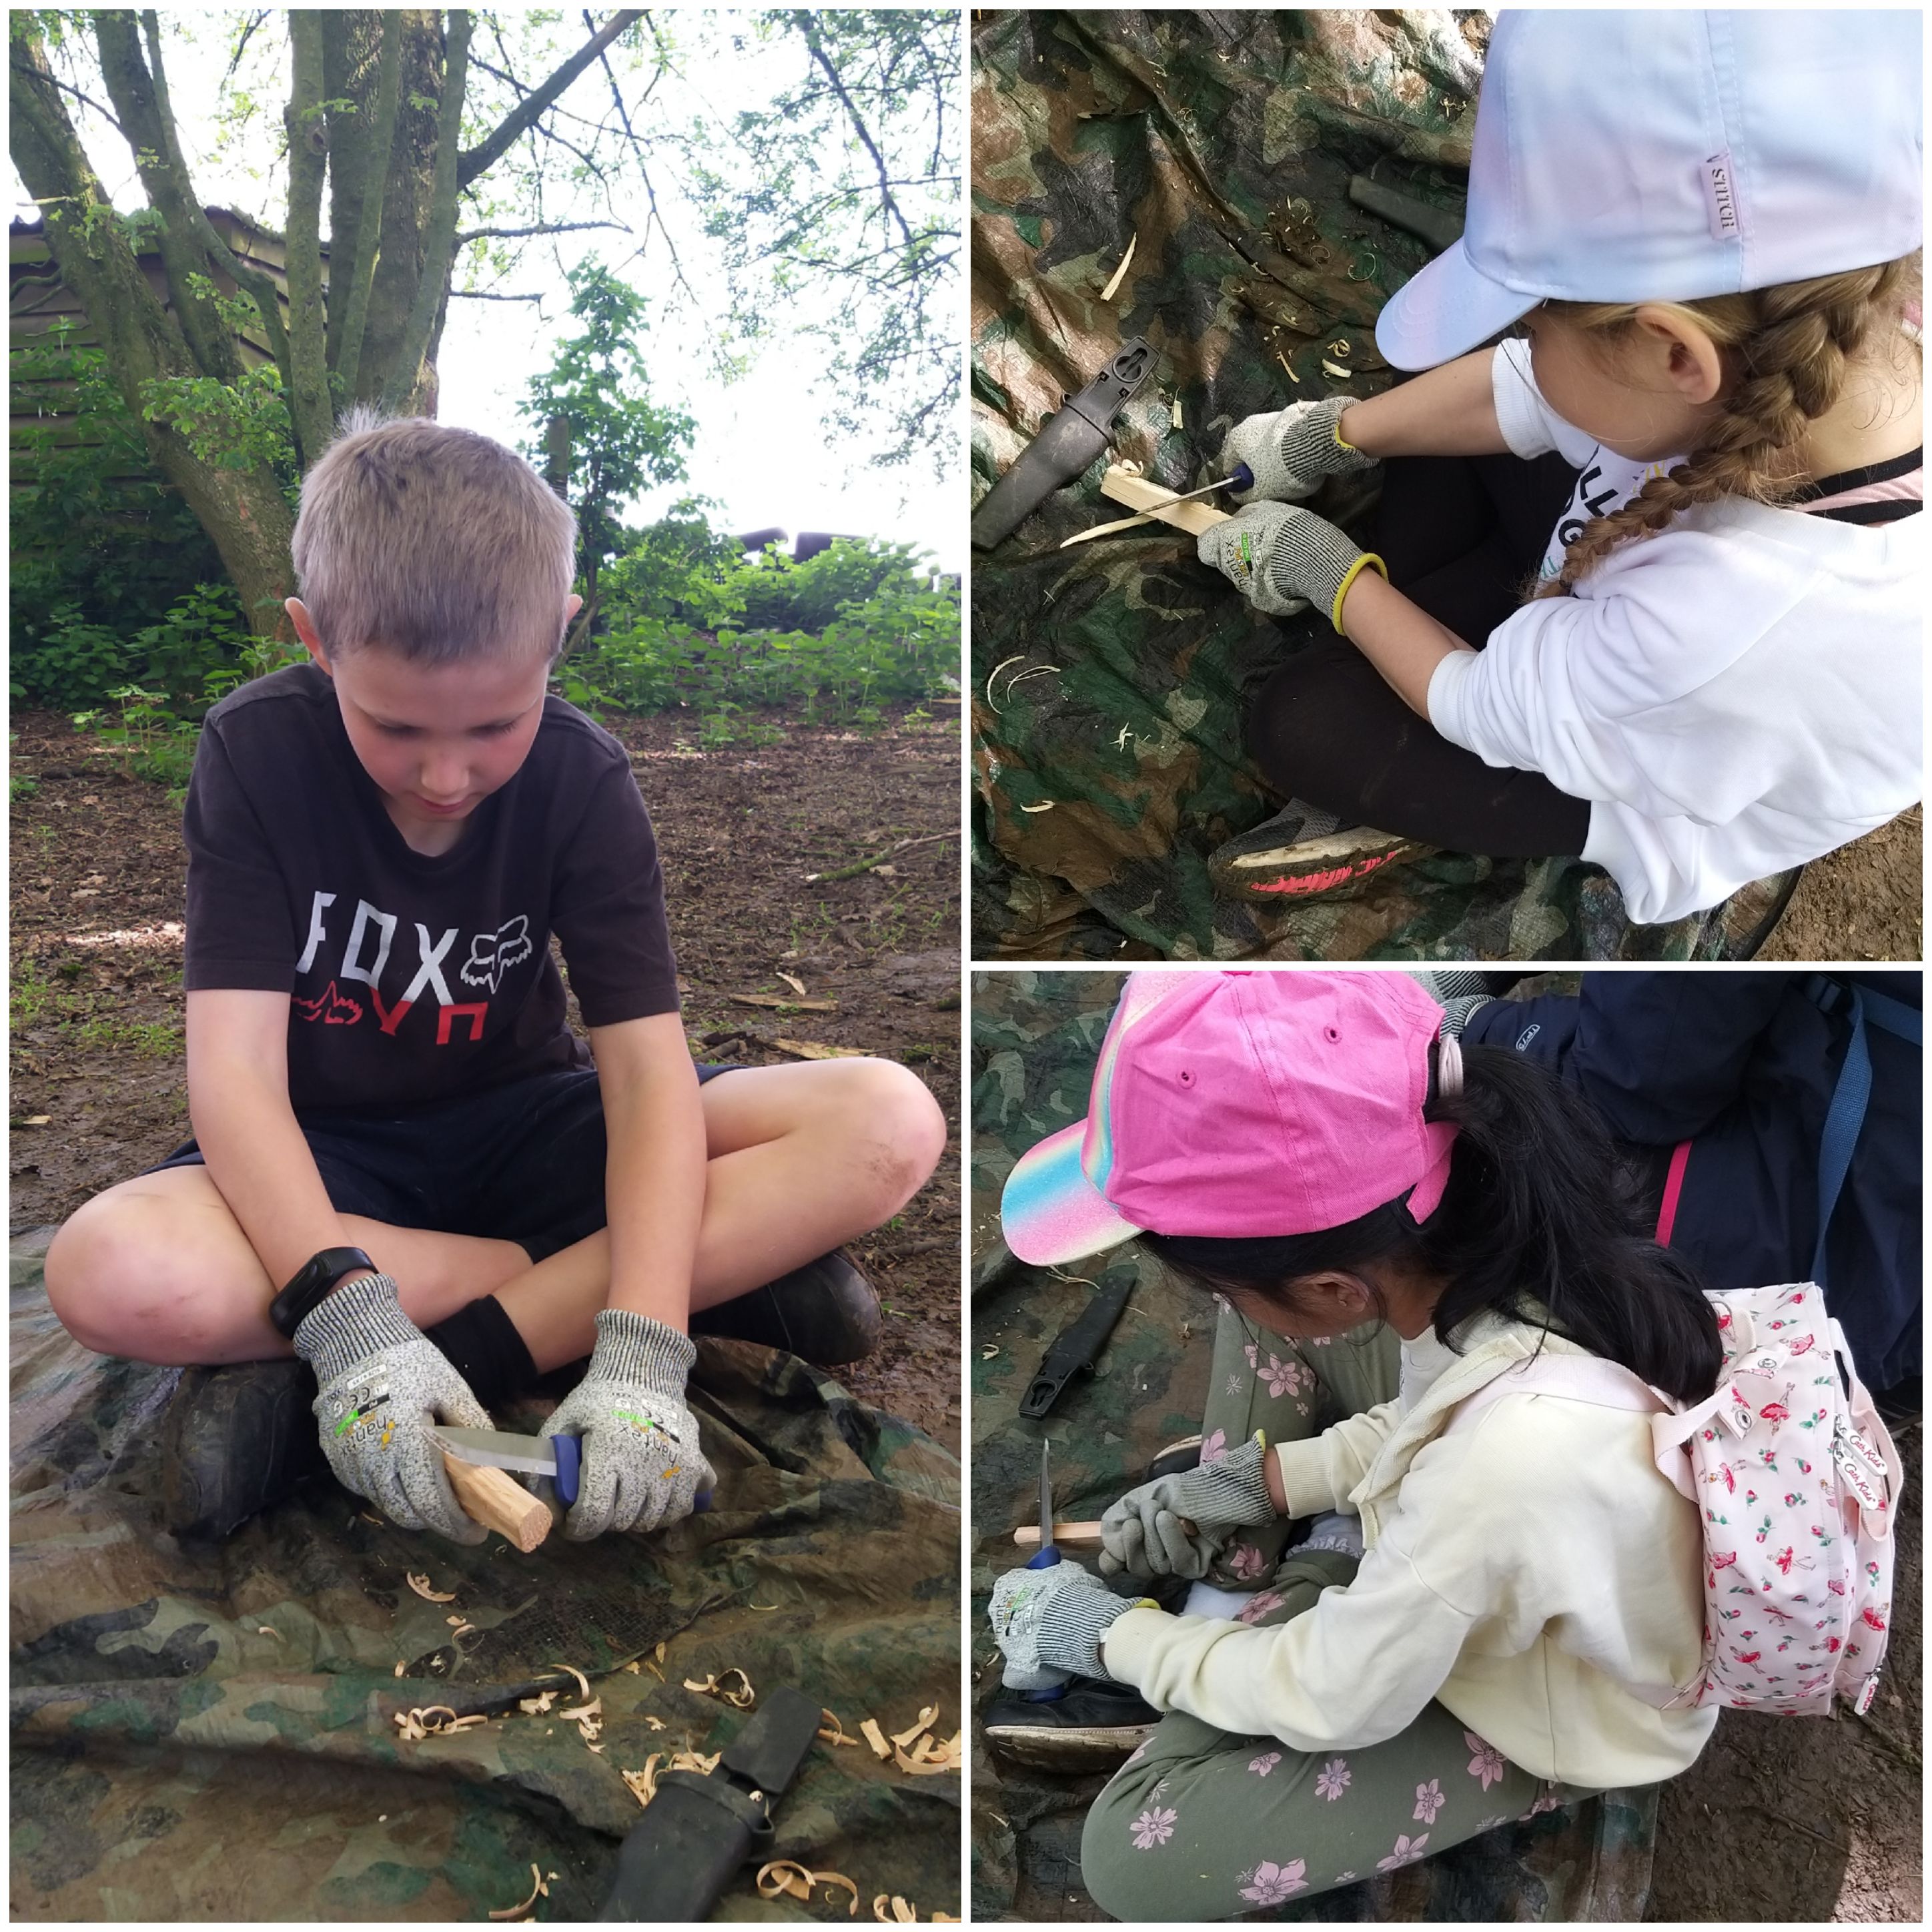 Wearing gloves, children use knives to whittle wood during a survival skills workshop